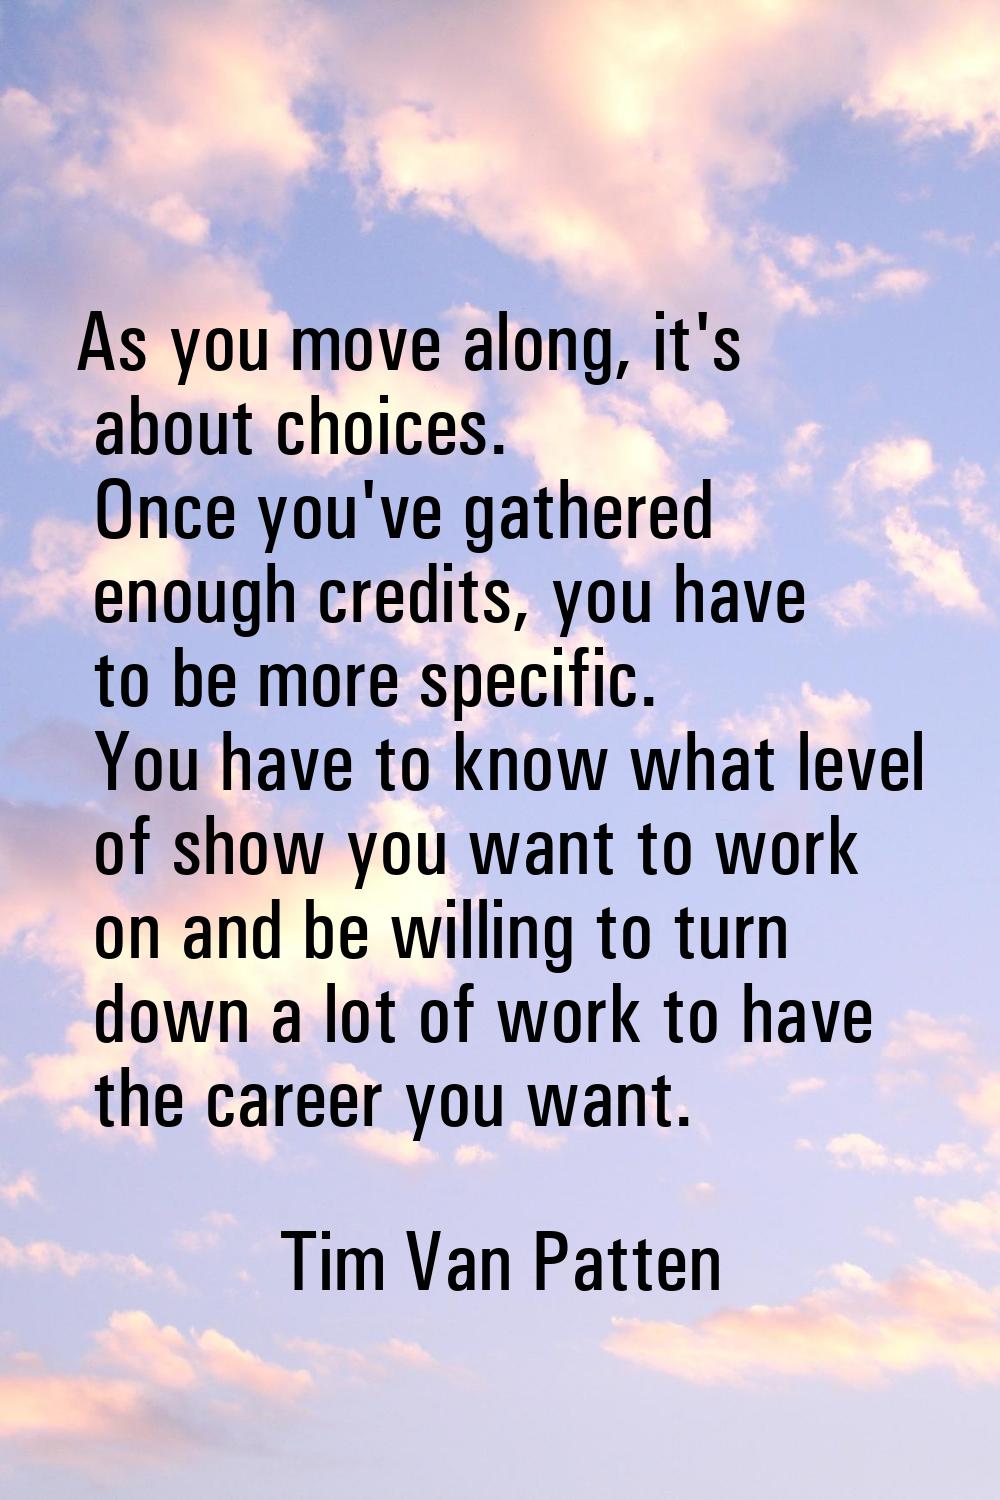 As you move along, it's about choices. Once you've gathered enough credits, you have to be more spe